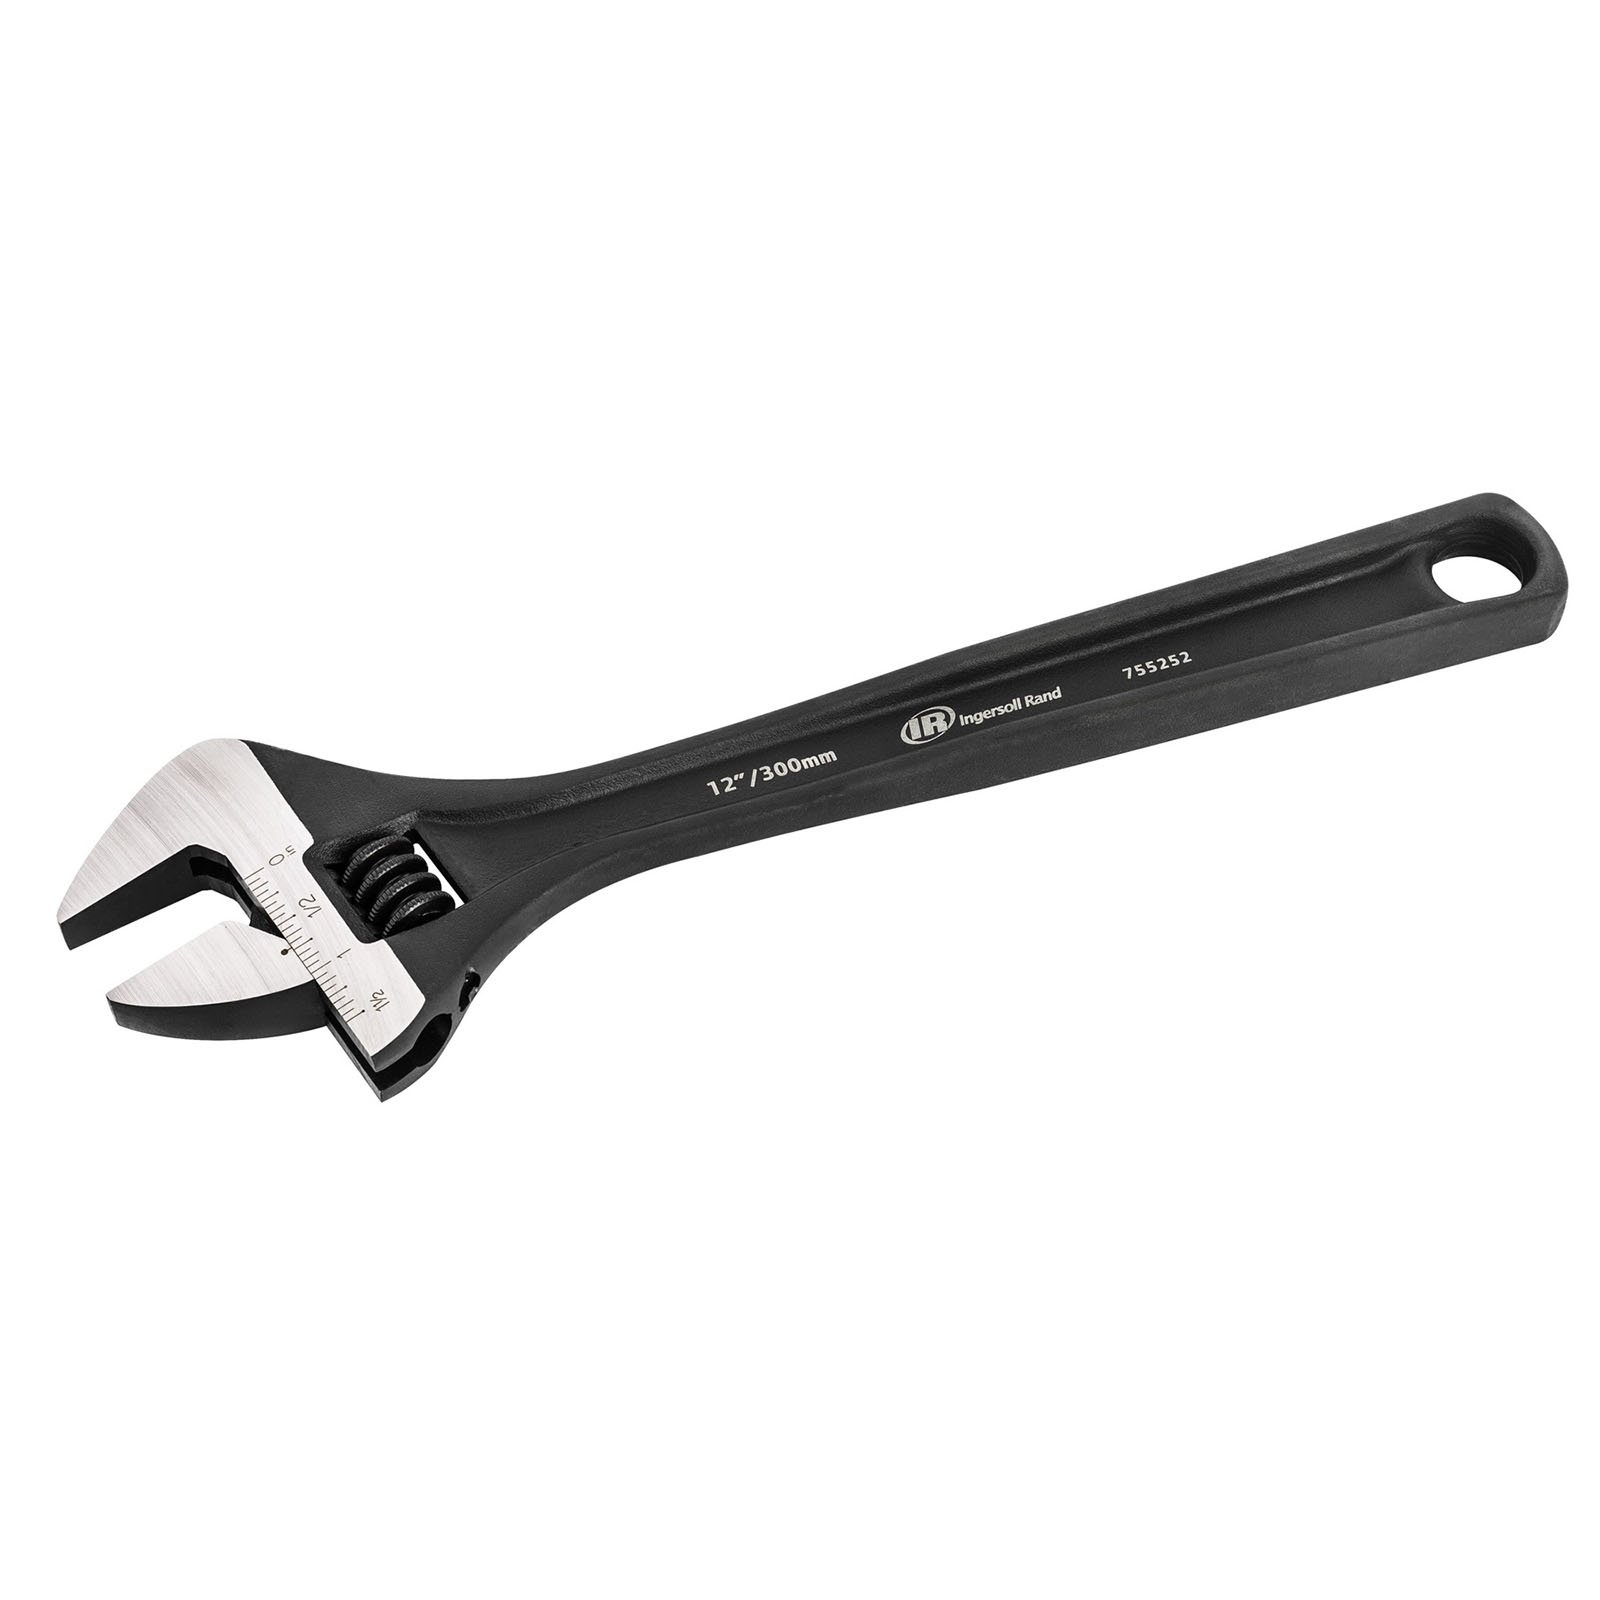 Ingersoll Rand 12 Inch Adjustable Wrench - 755252X